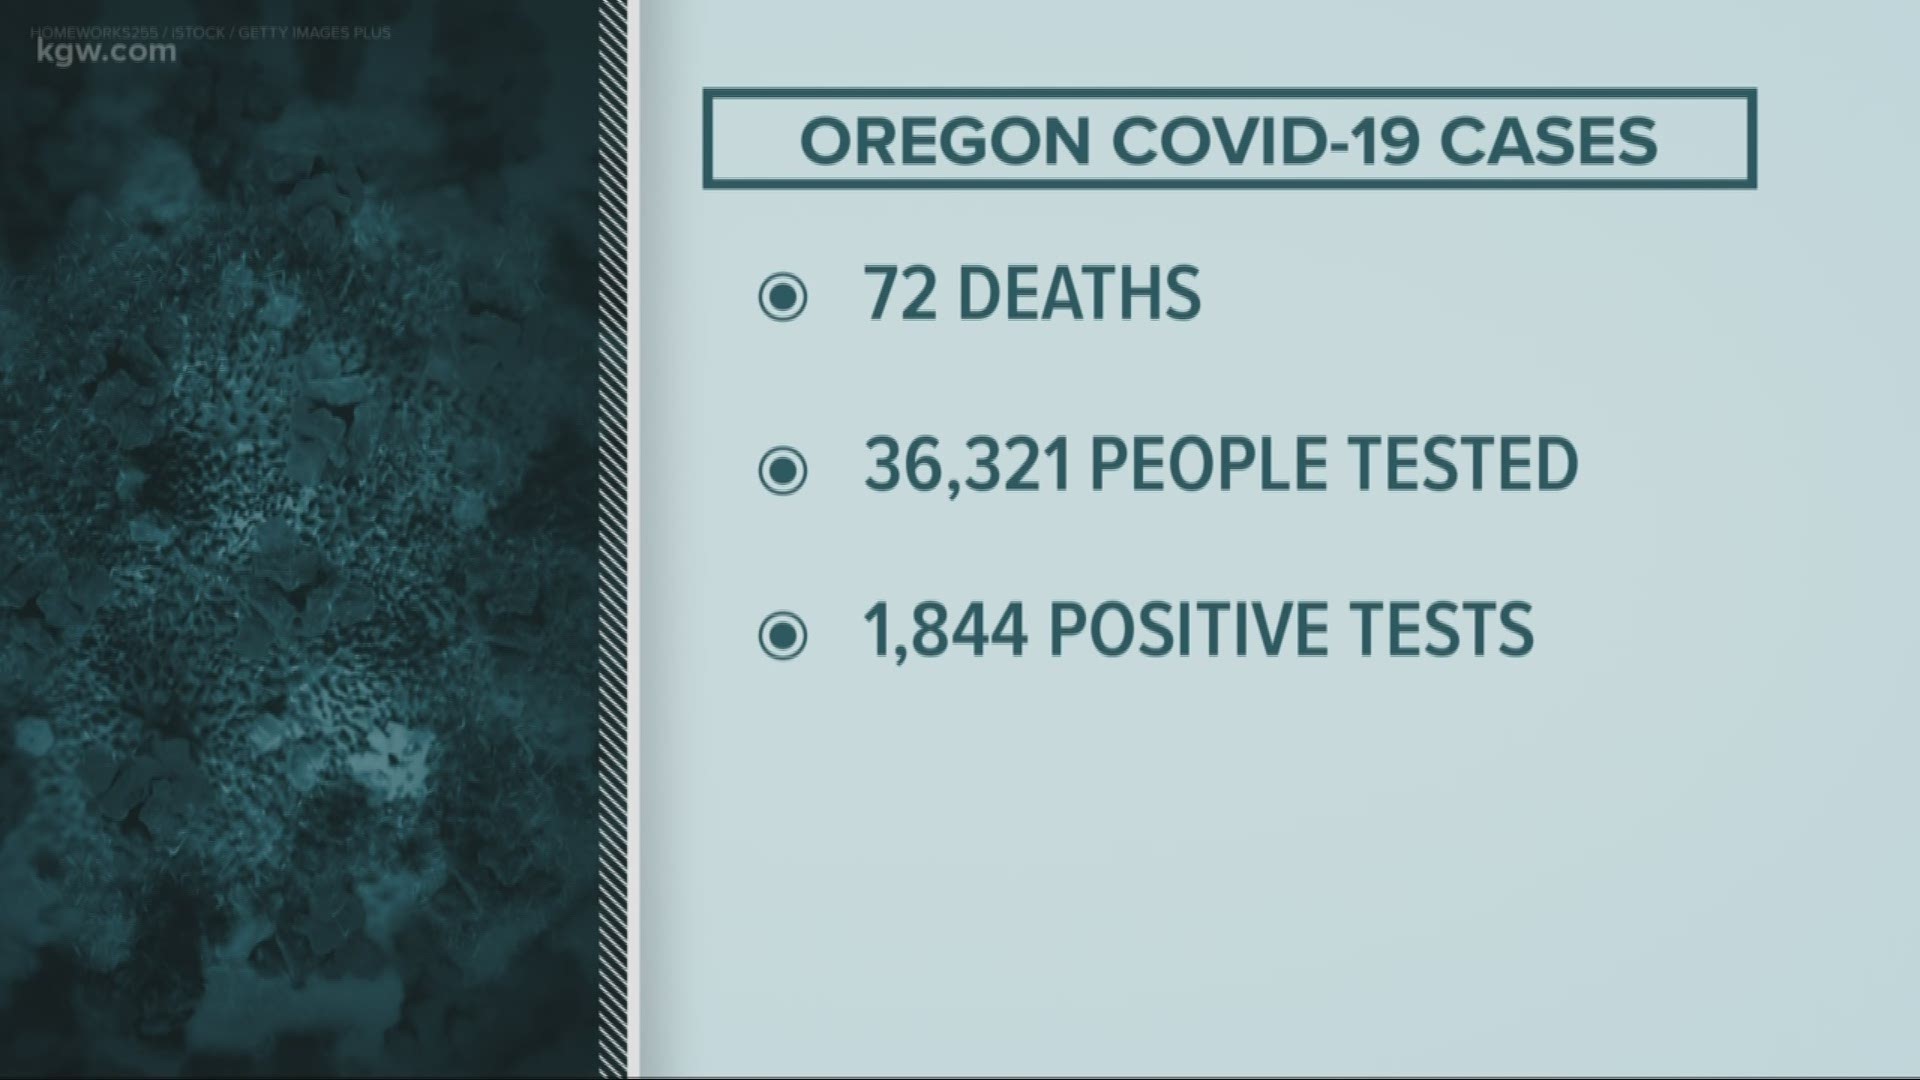 Over 600 people have died in Washington State from COVID-19 and 72 in Oregon as of April 18.